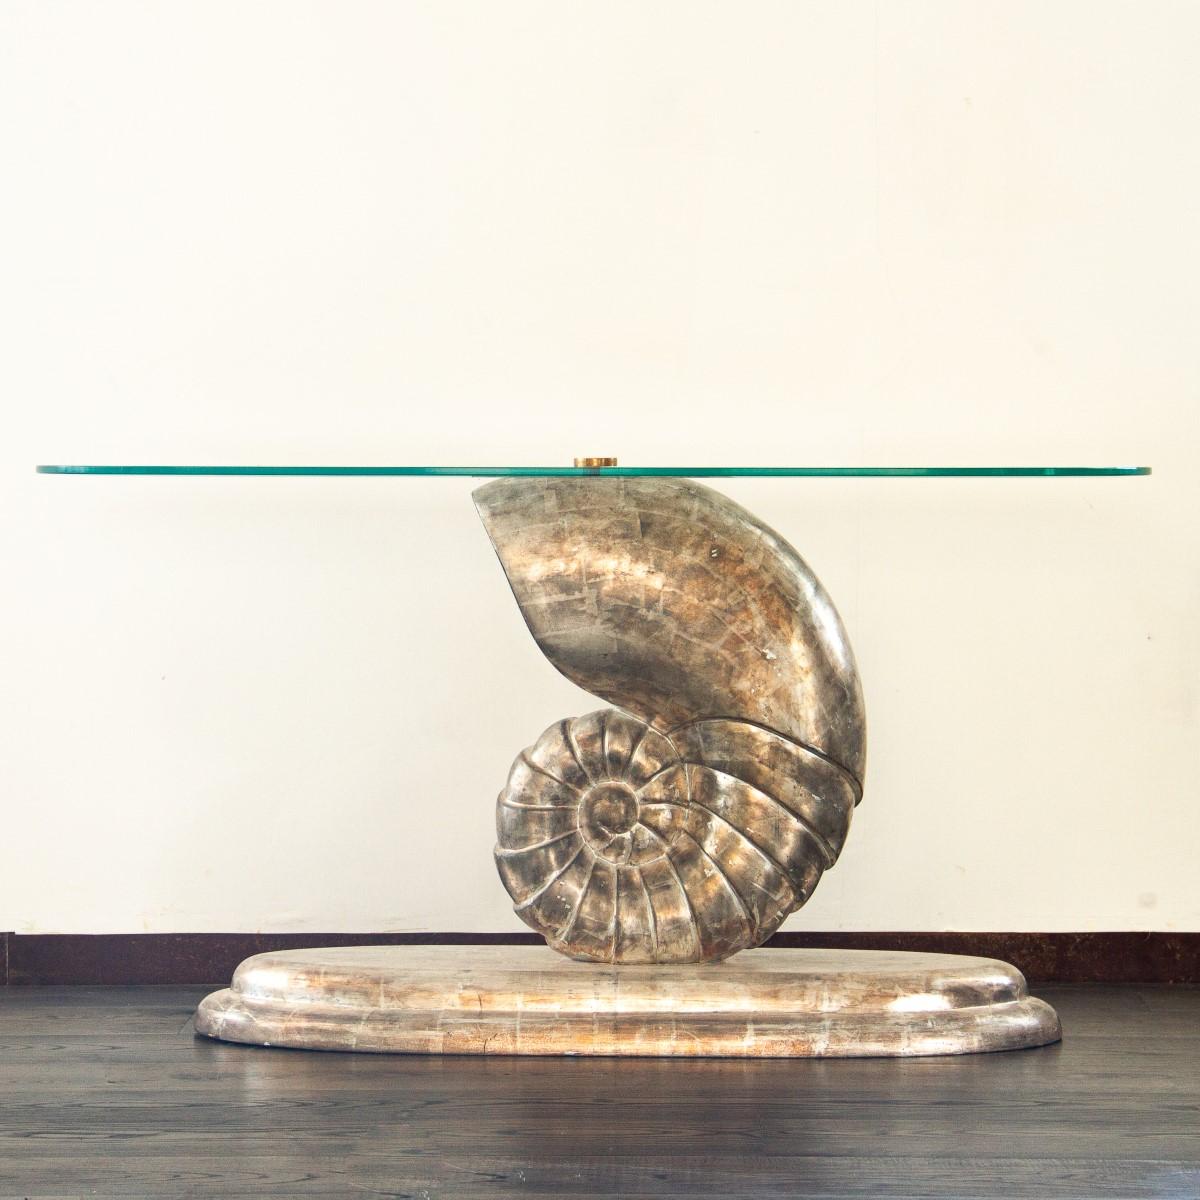 A rare 1960s nautilus shell console table, carved in plaster with stunning detail finished in white gold leaf surmounted by an oval glass top and brass hardware. A truly distinctive look that would work extremely well in a coastal interior or as a